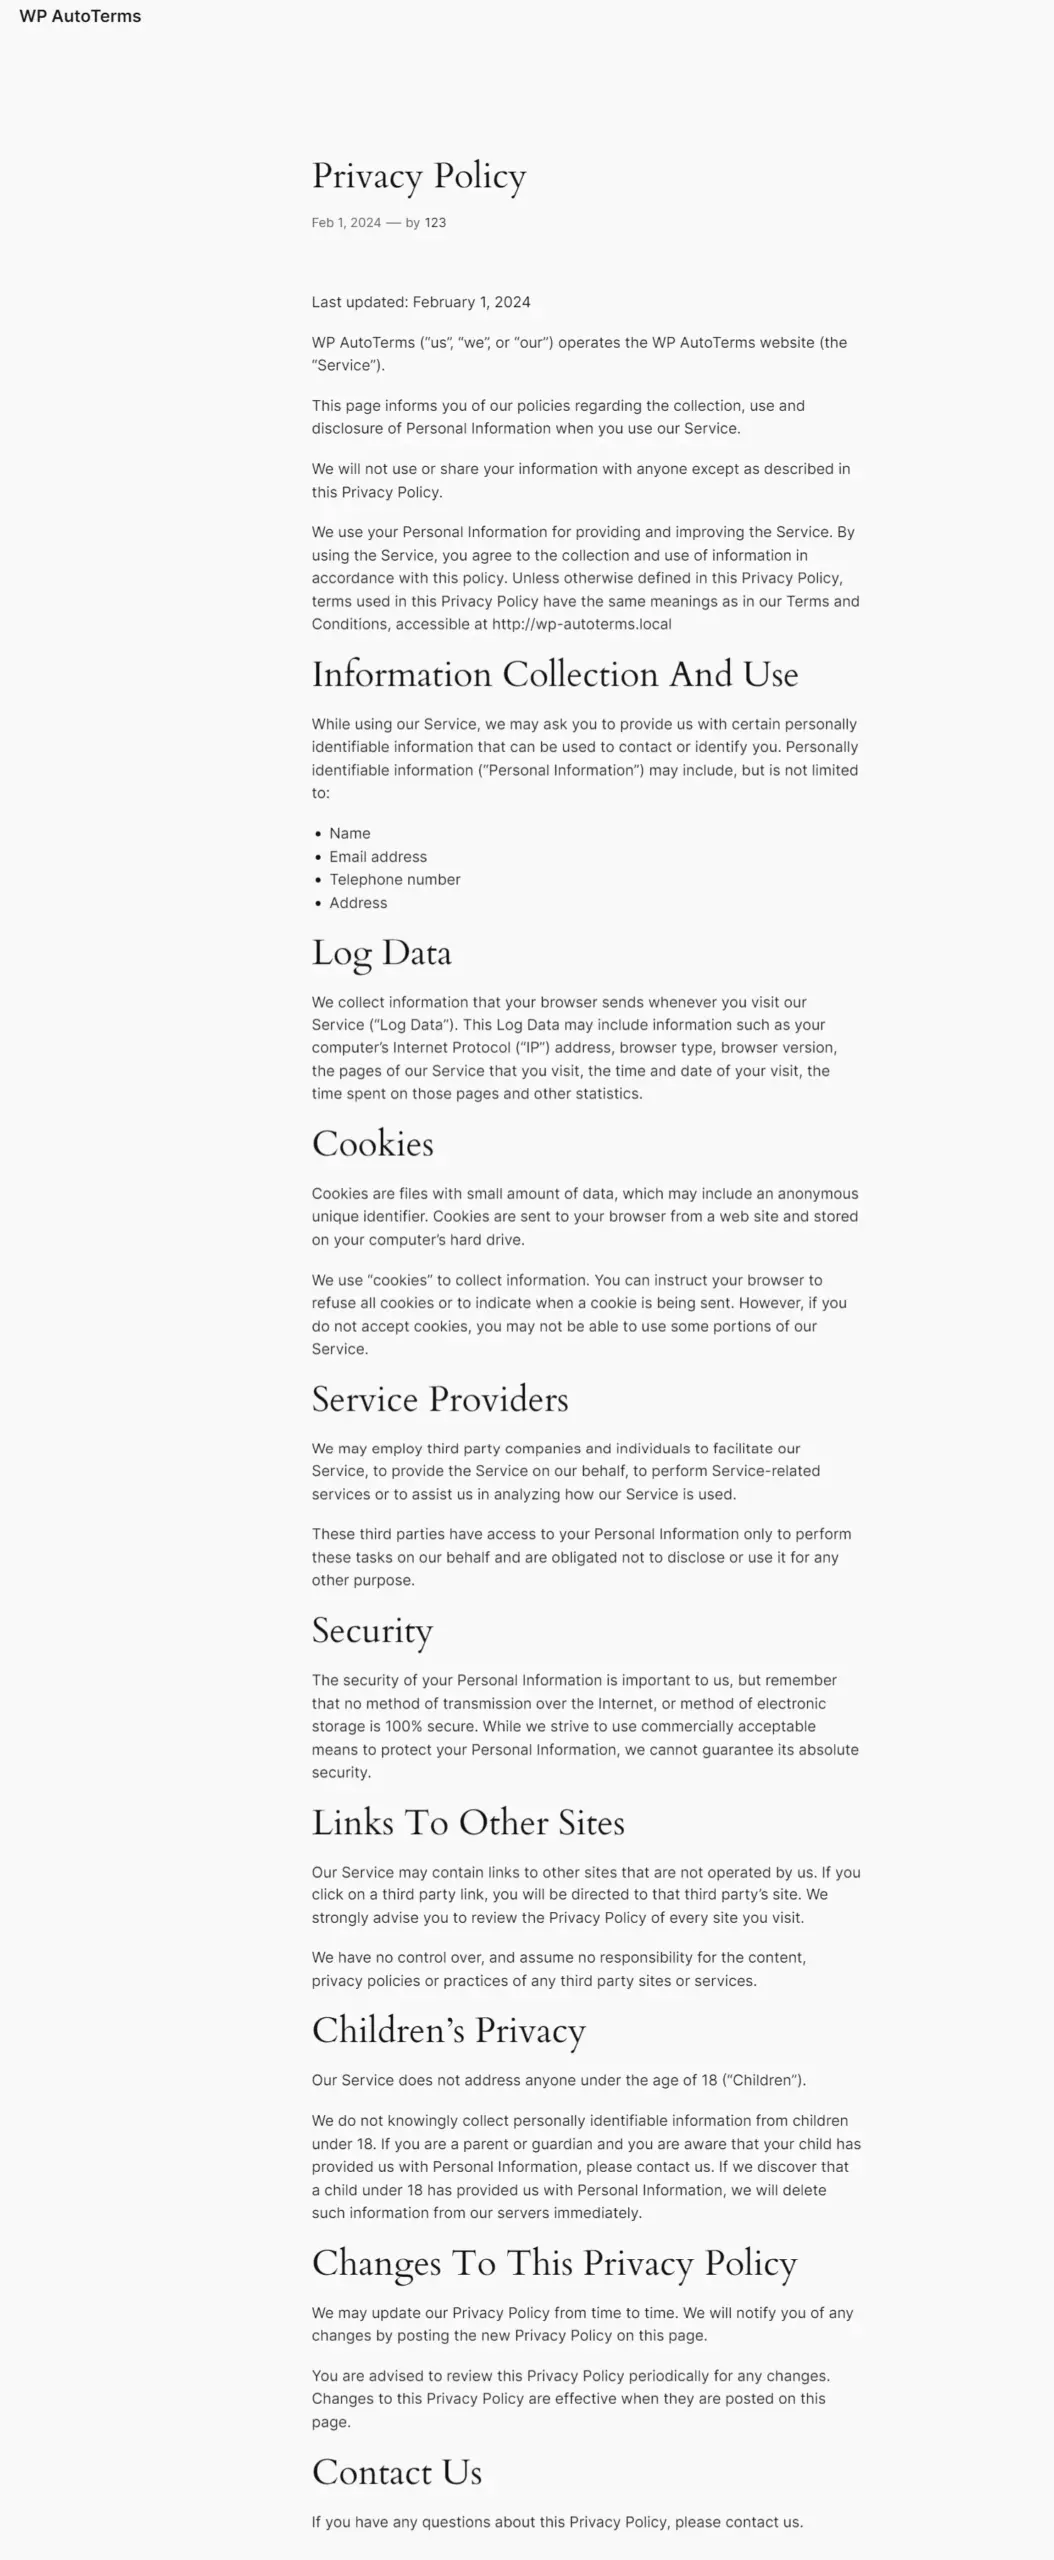 WP AutoTerms privacy policy template preview.